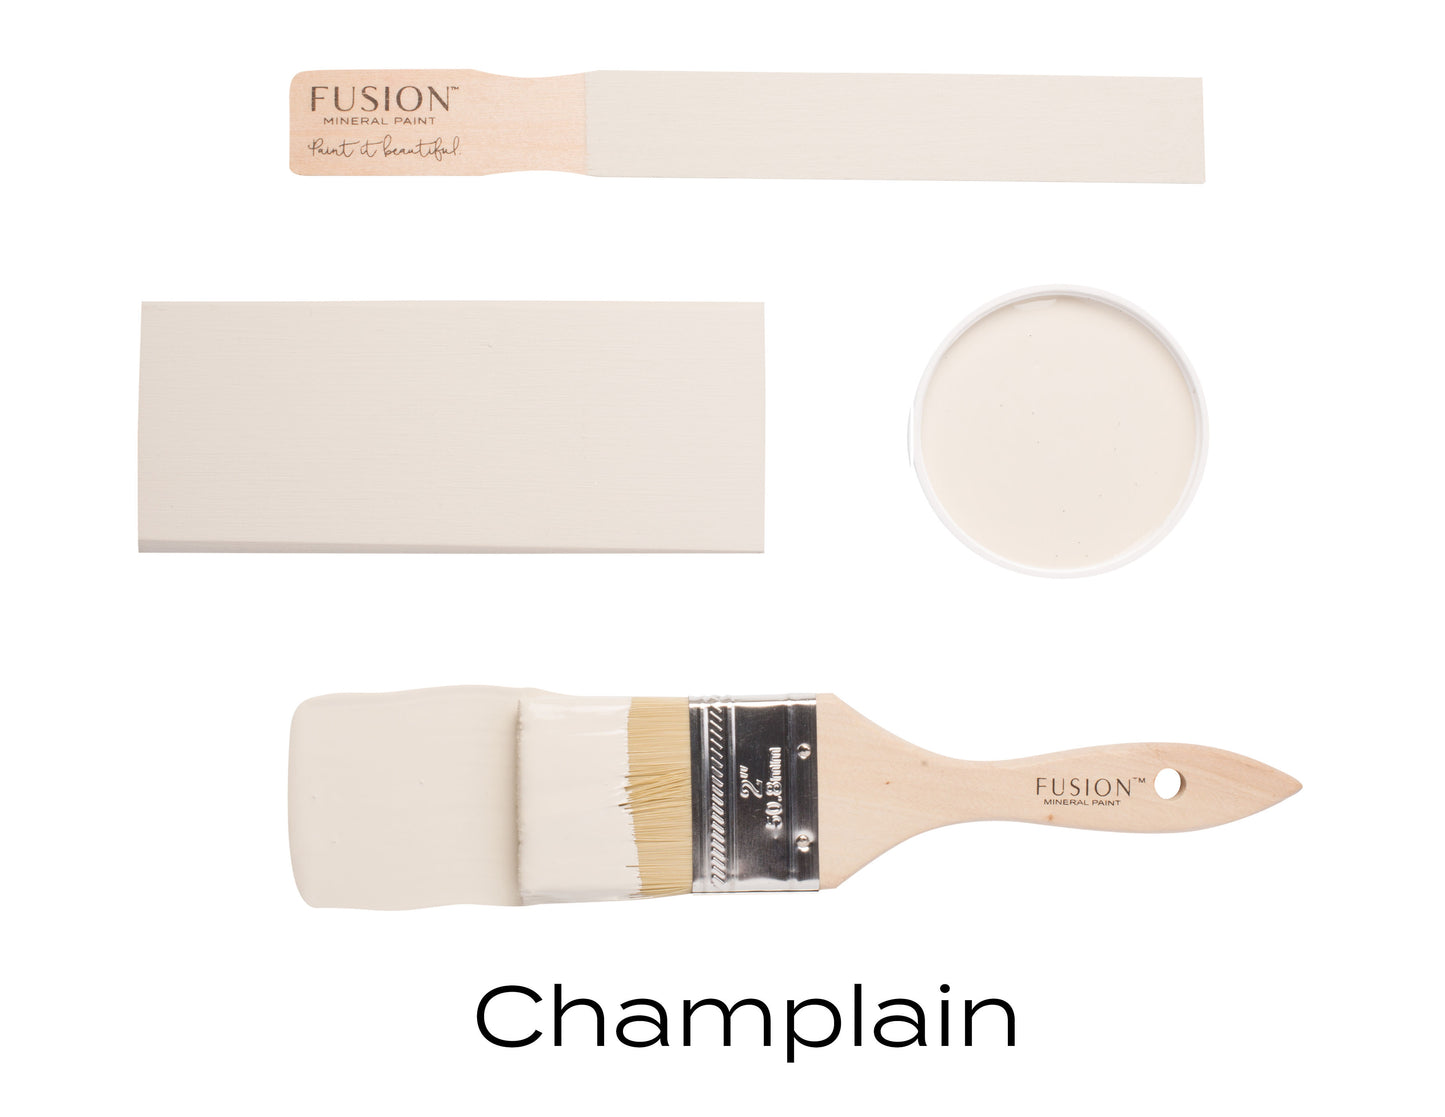 Champlain by Fusion